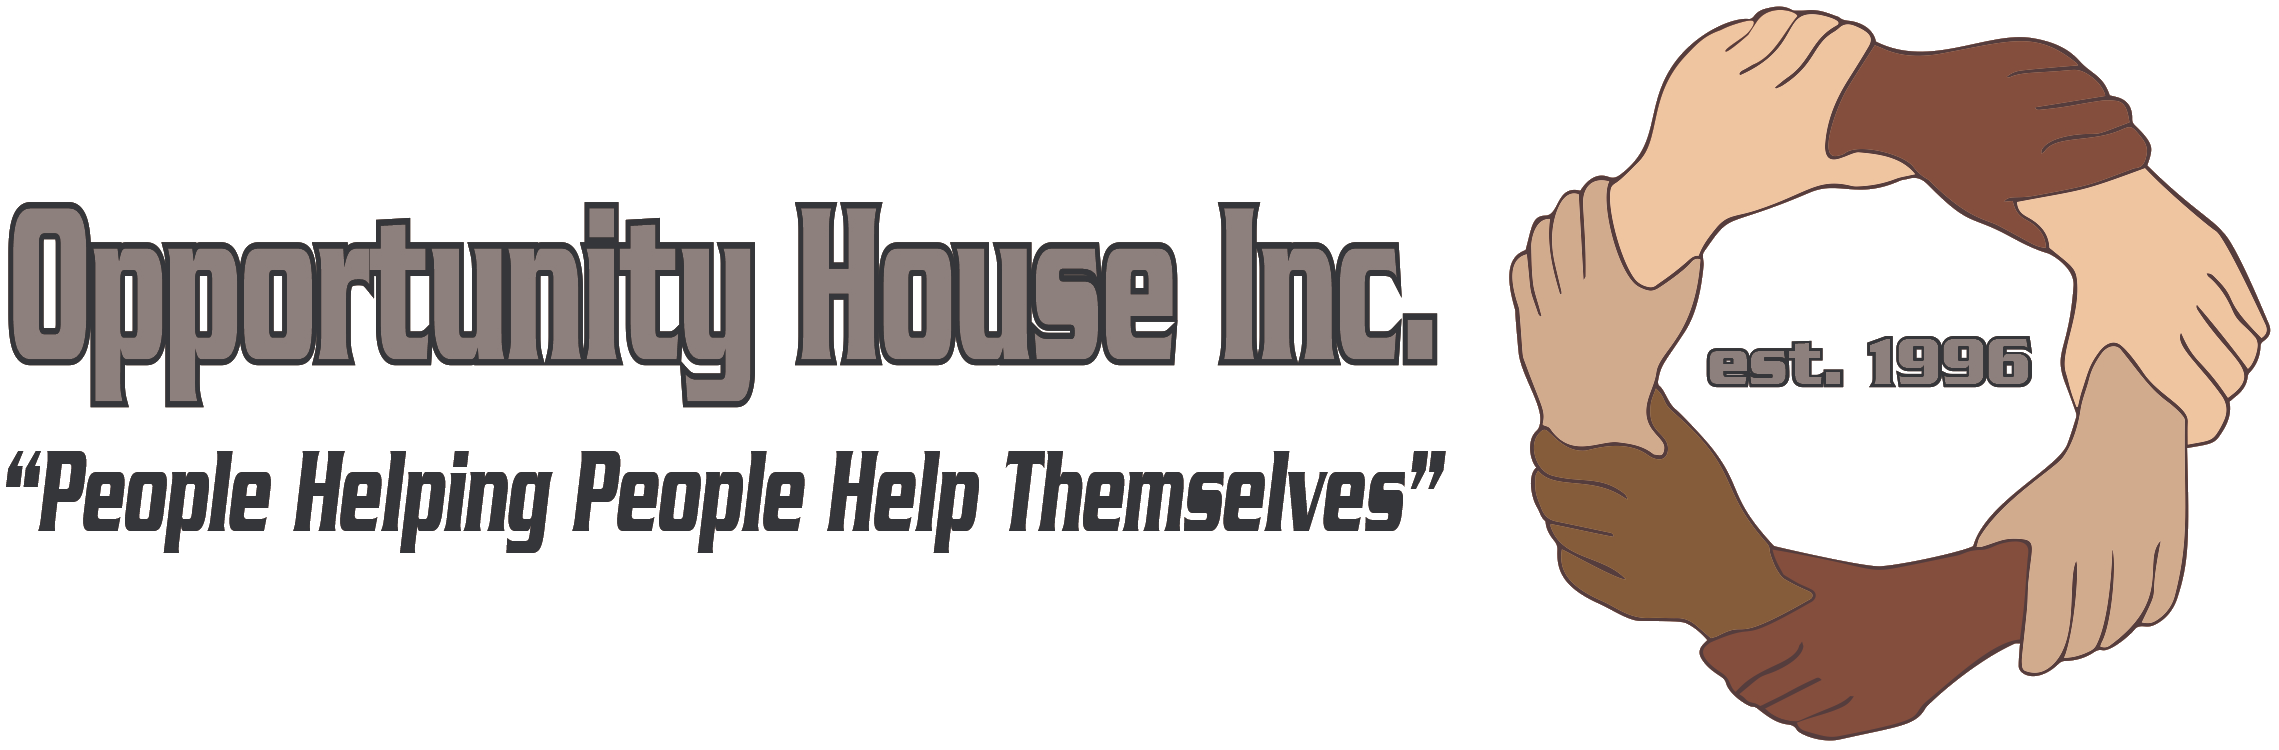 Opportunity House, Inc